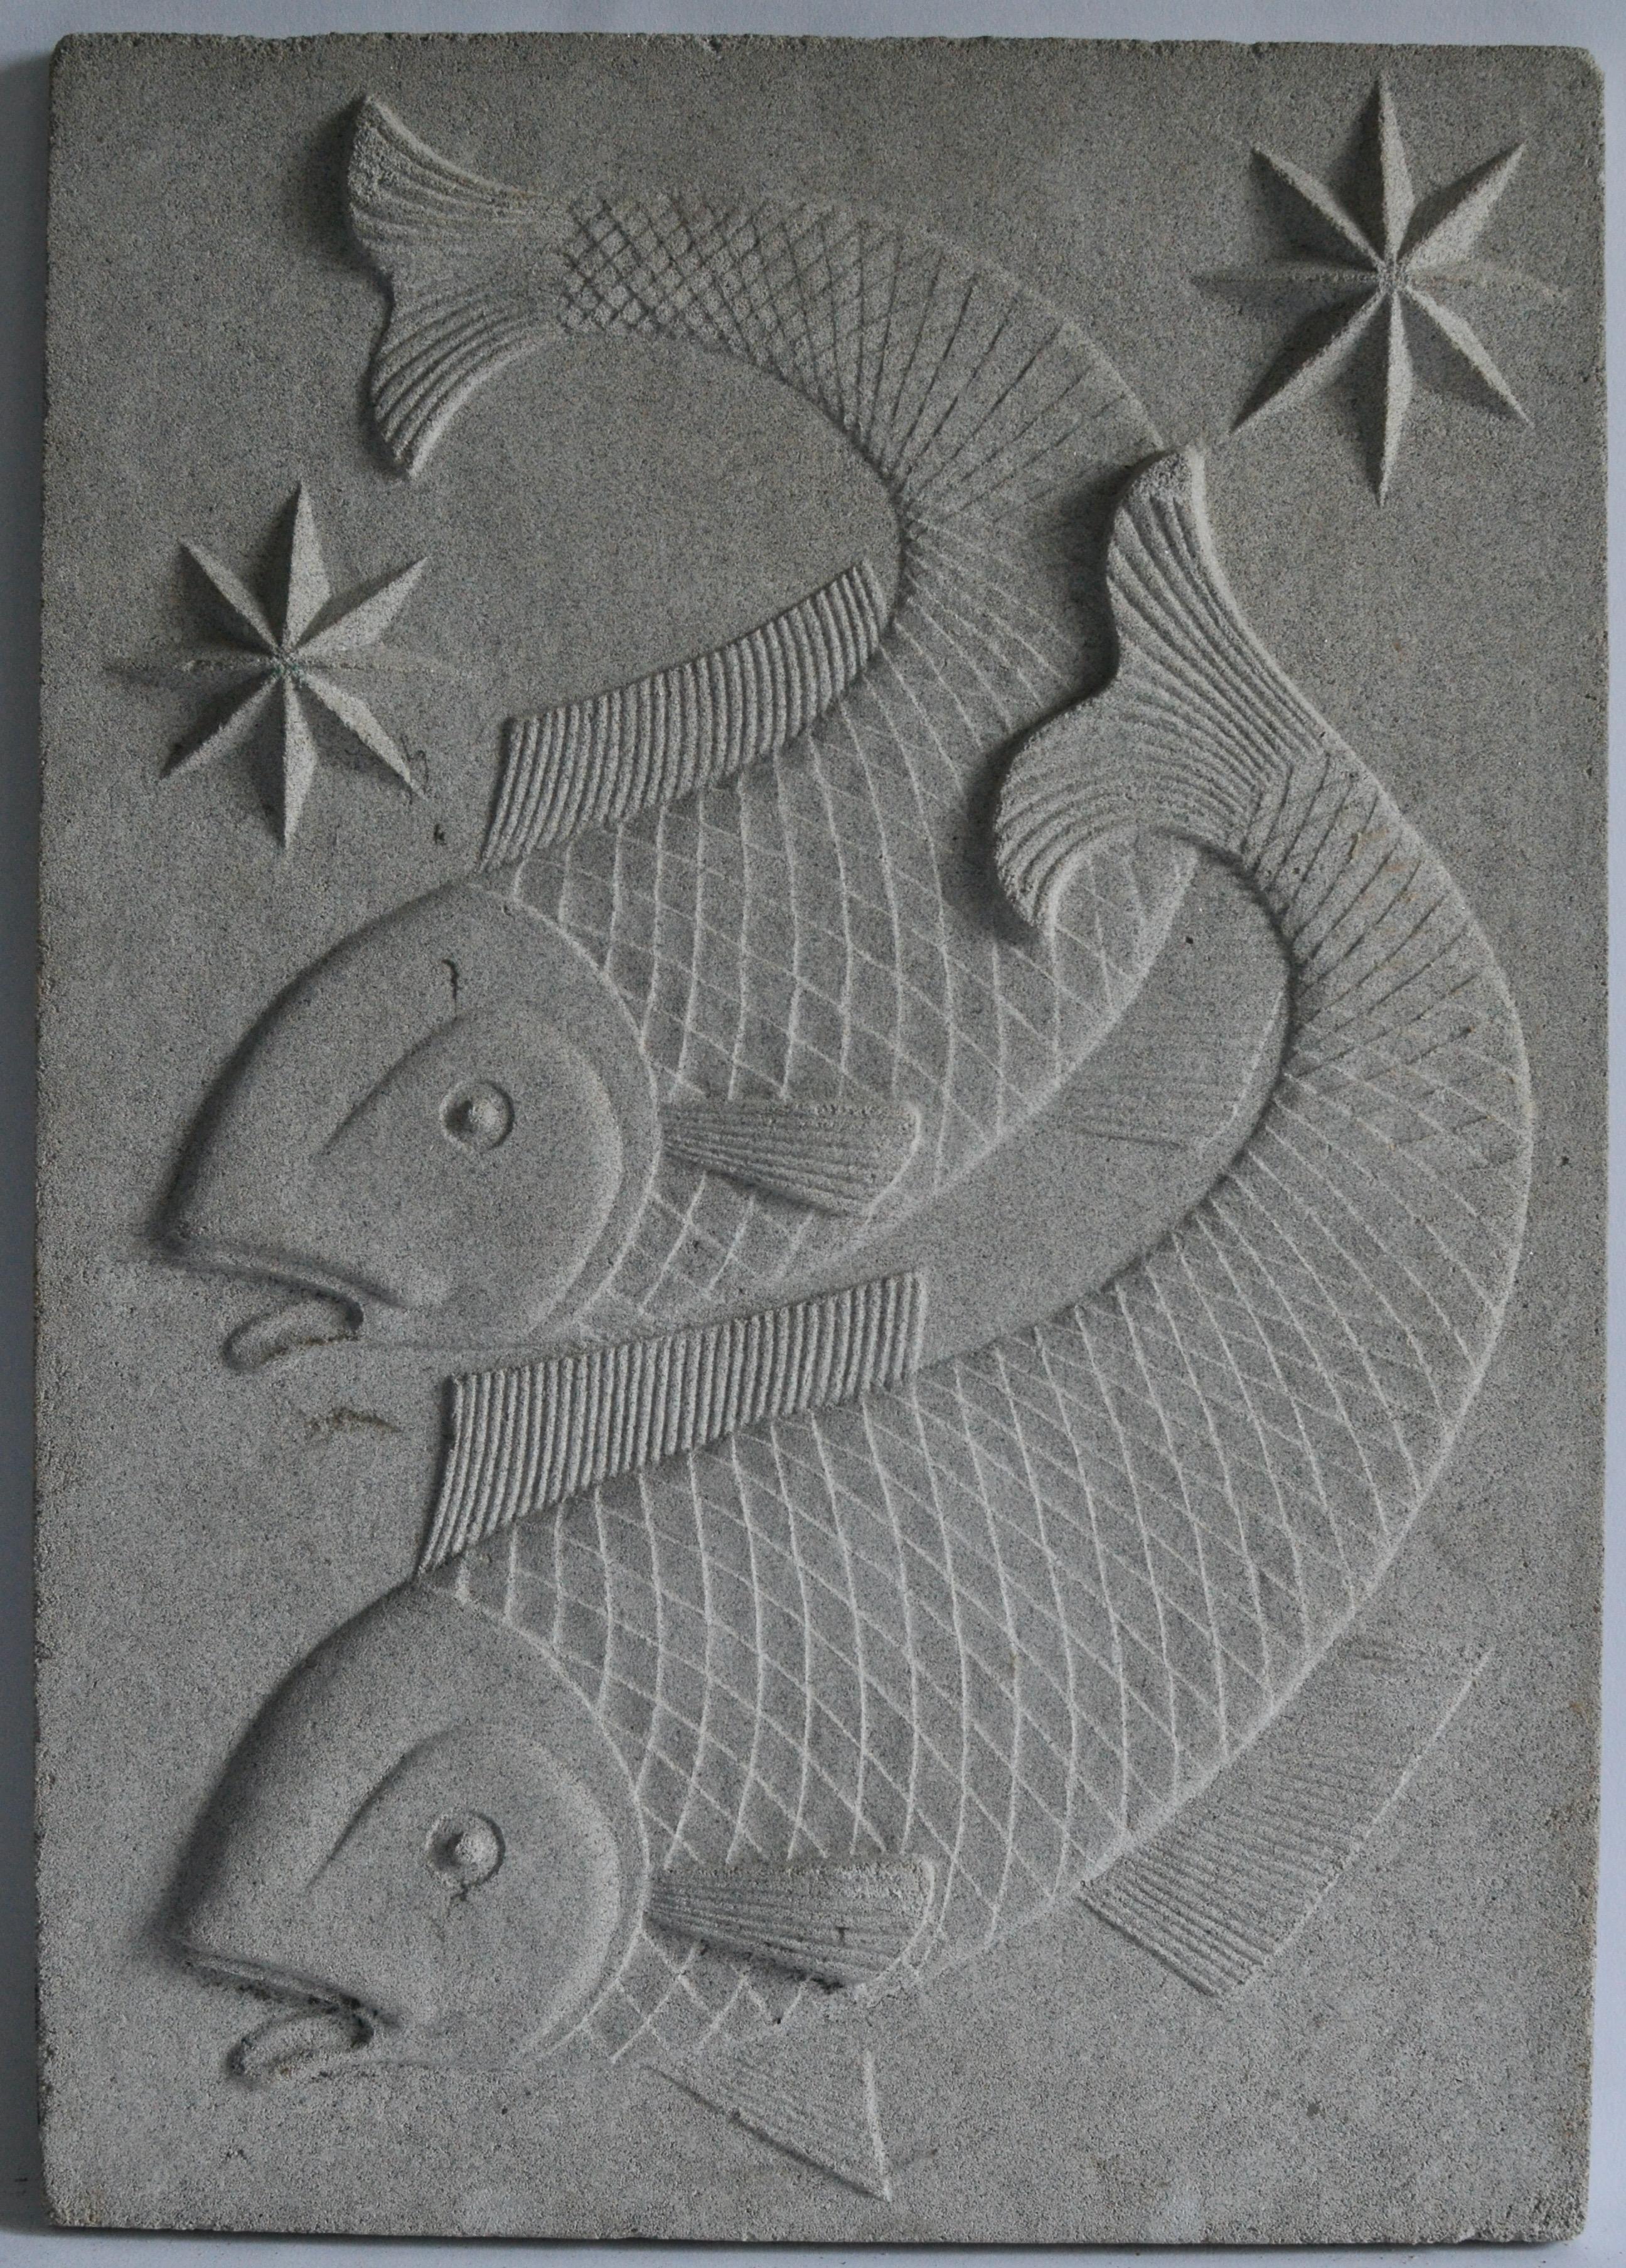 A cast zodiac artificial stone relief of Pisces c. 1940-1950 by Manne Östlund (1904-1957) 

There is a set of 8 different Zodiac signs and we are selling them separately or all together.